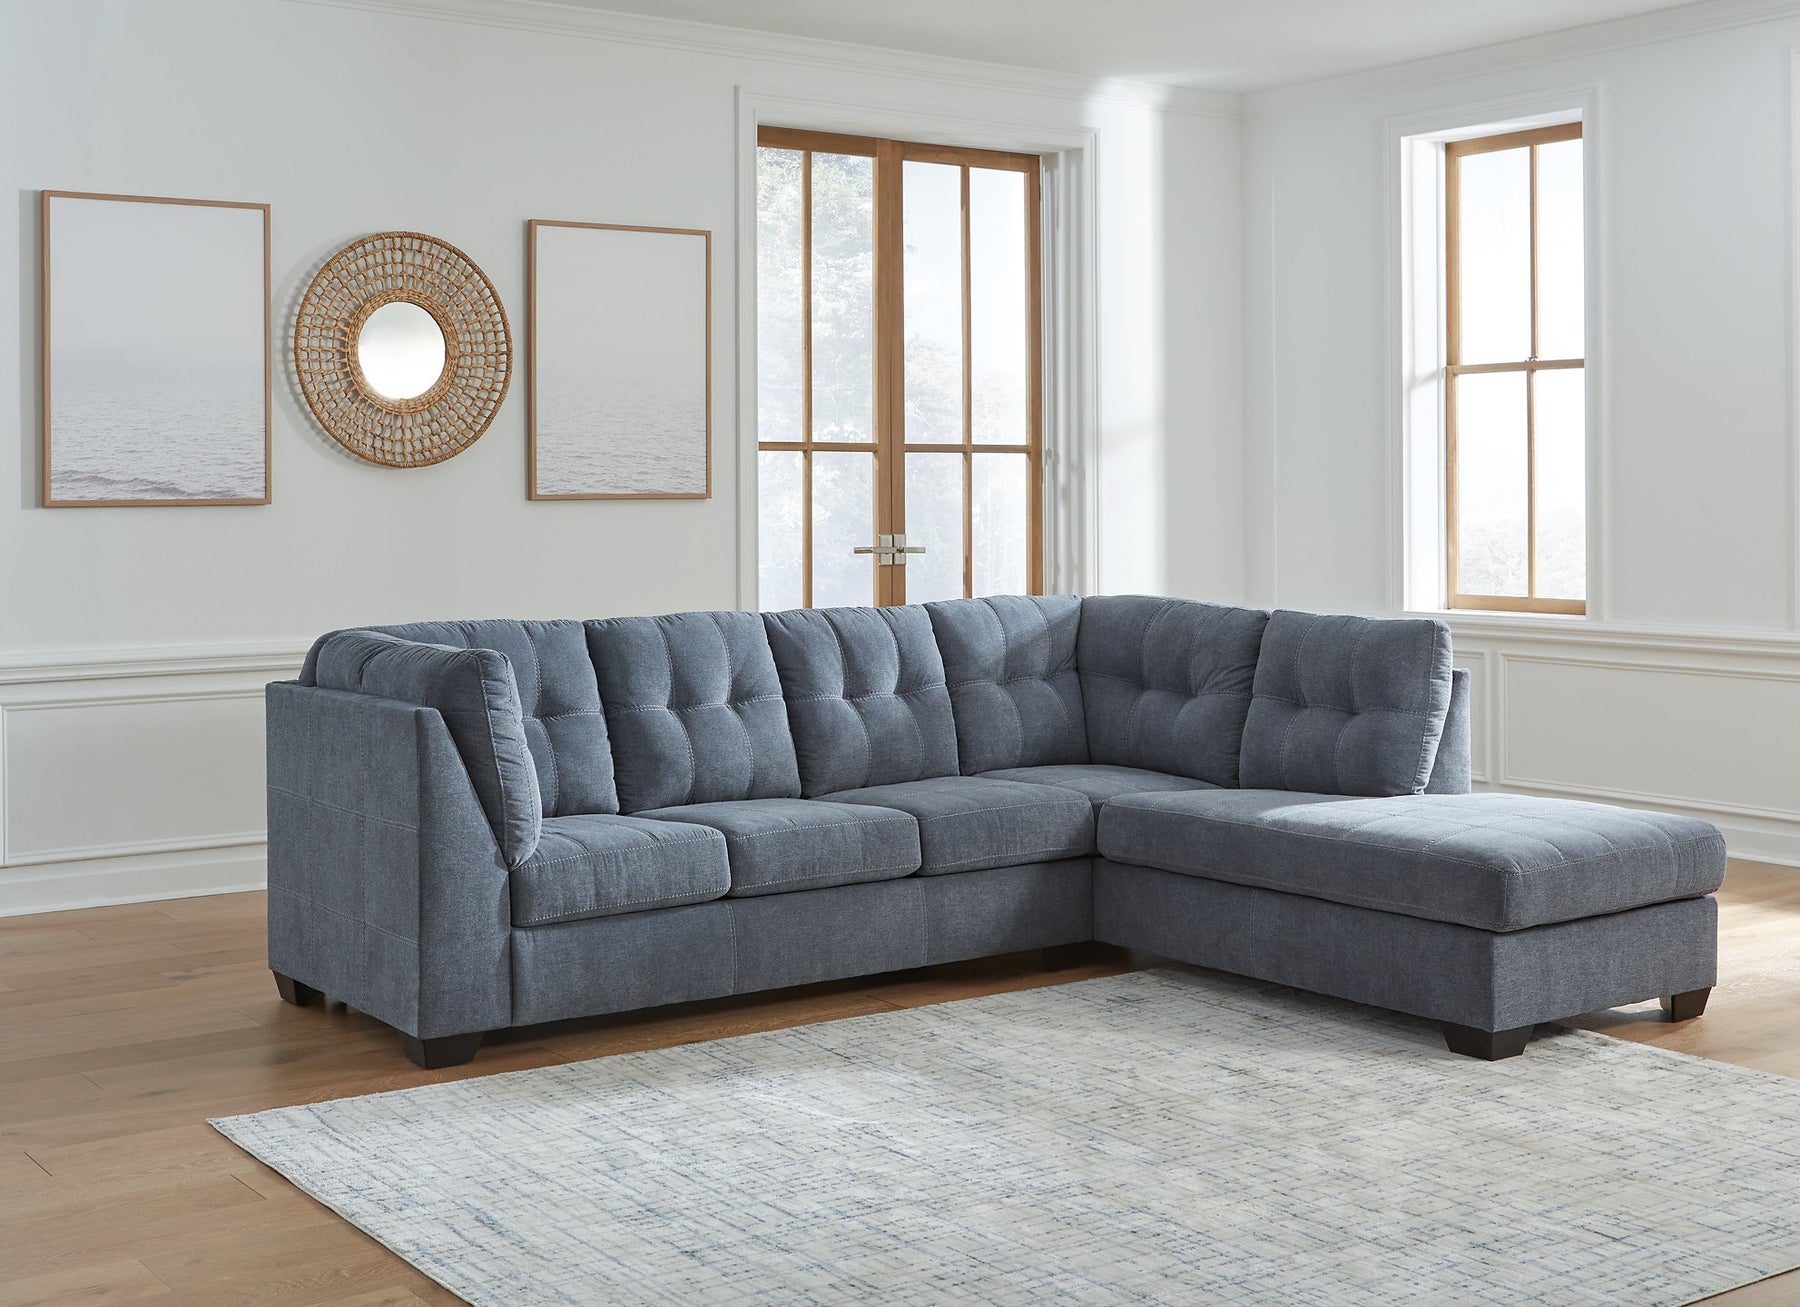 Marleton 2-Piece Sectional with Chaise - Half Price Furniture